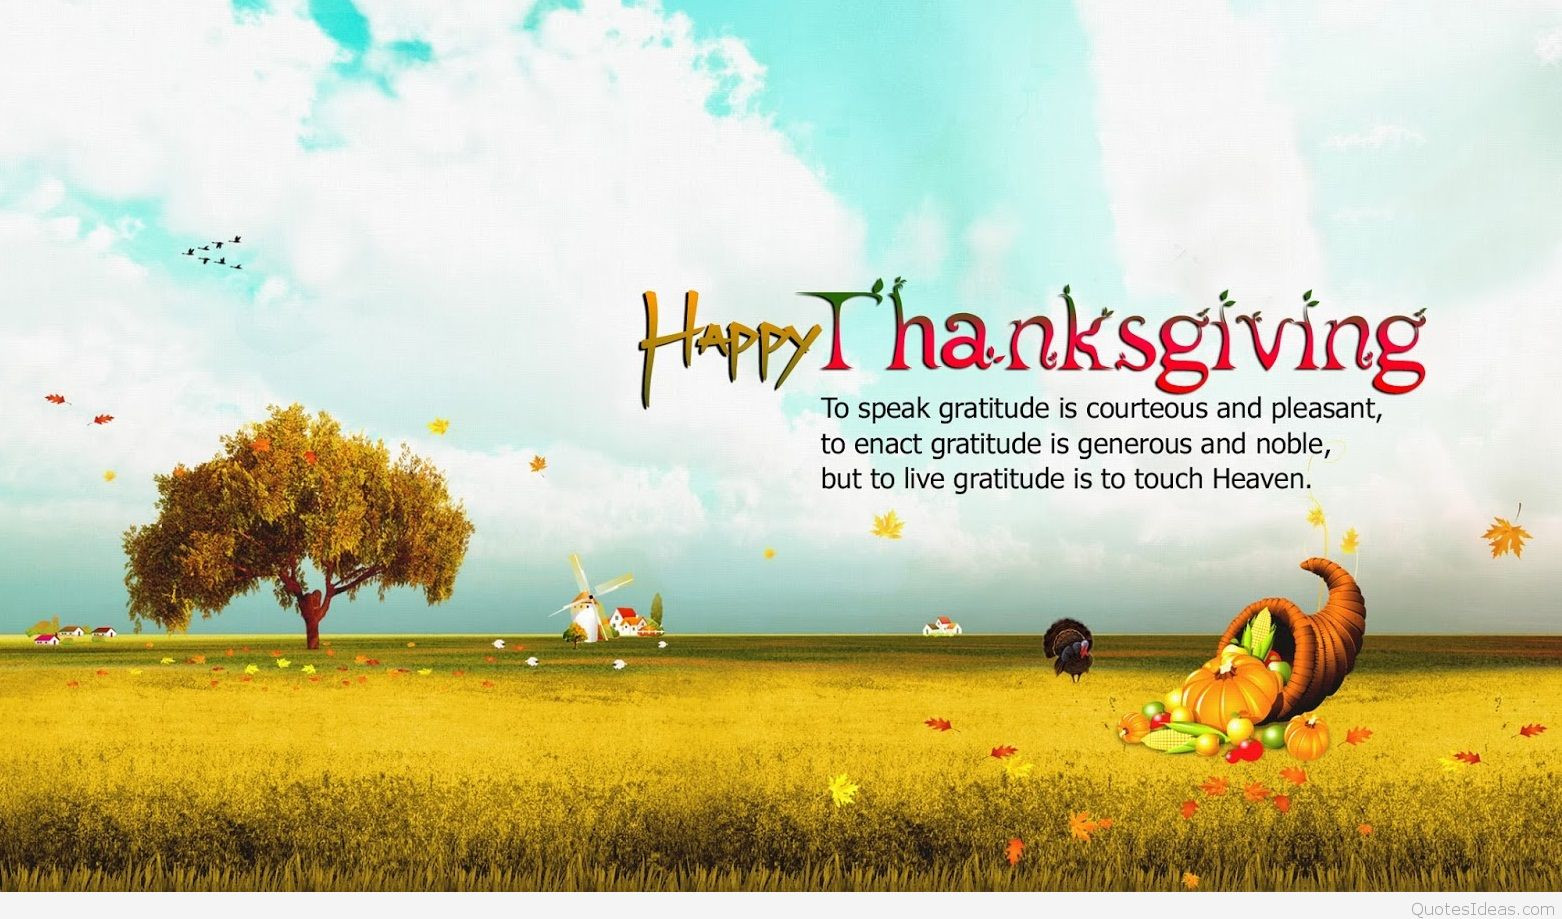 Thanksgiving Quotes Wallpaper
 Happy thanksgiving quotes wallpapers images 2015 2016